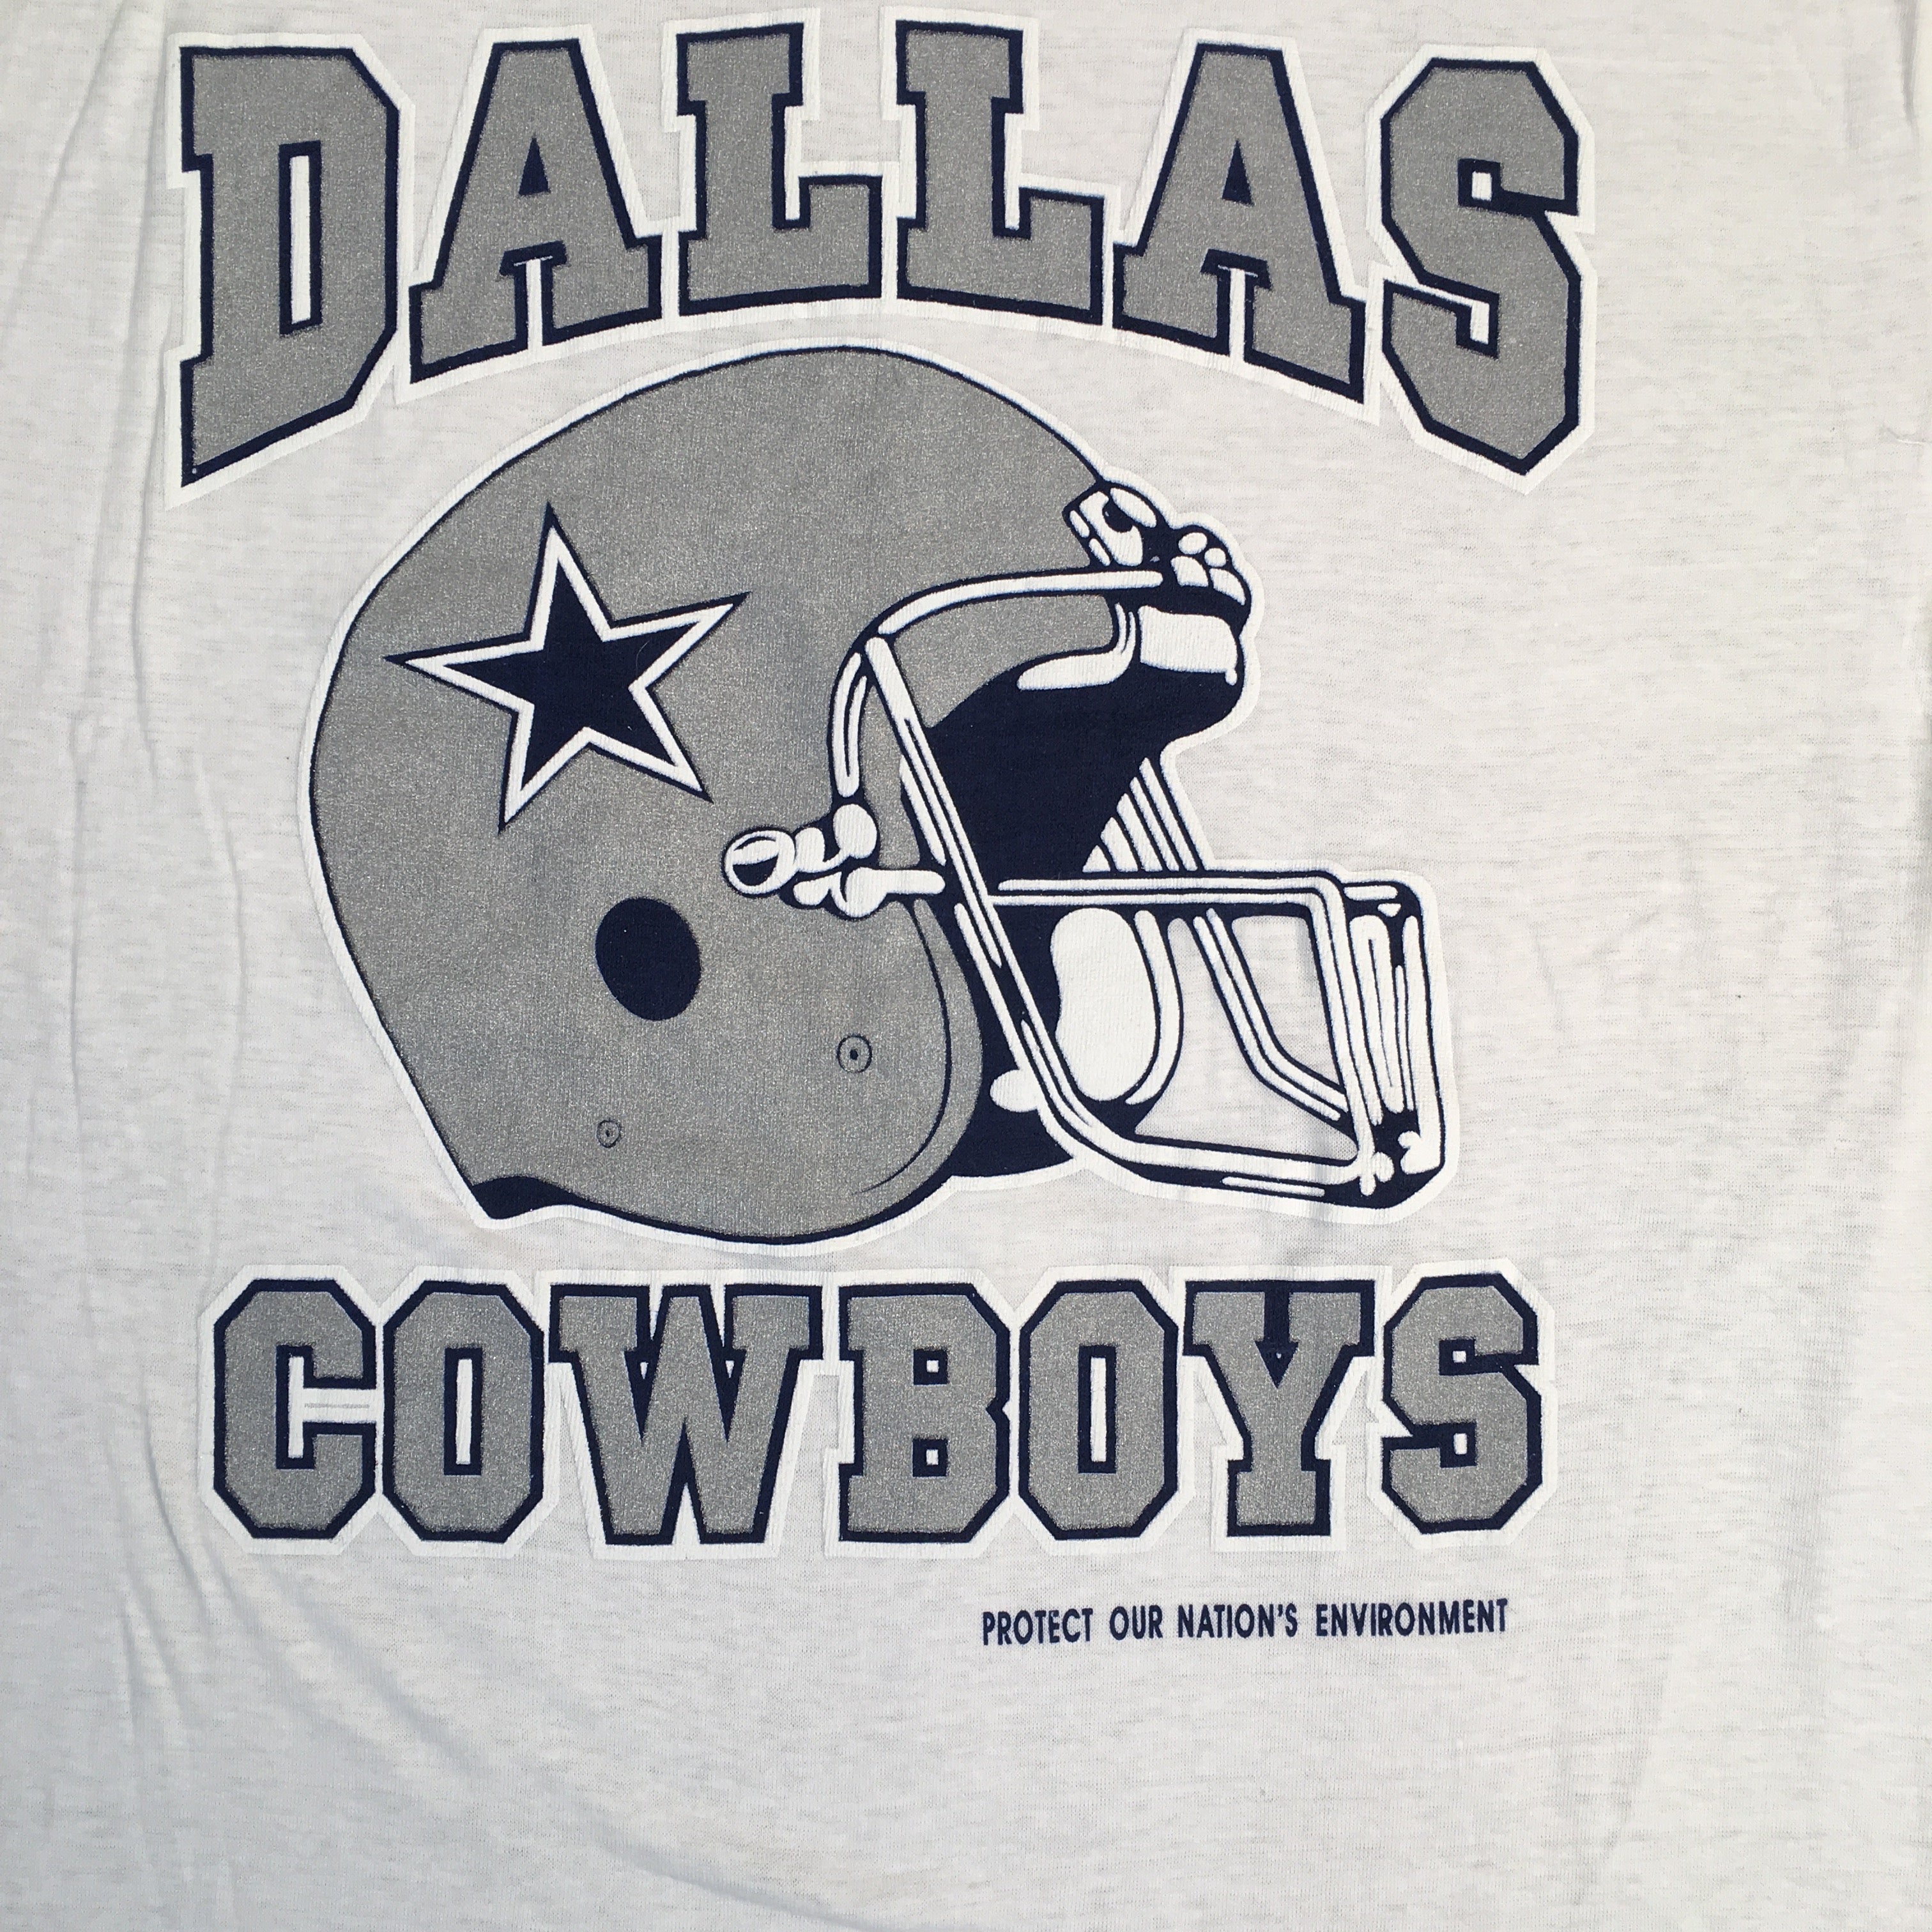 Vintage Dallas Cowboys 'Protect Our Nations' T-Shirt